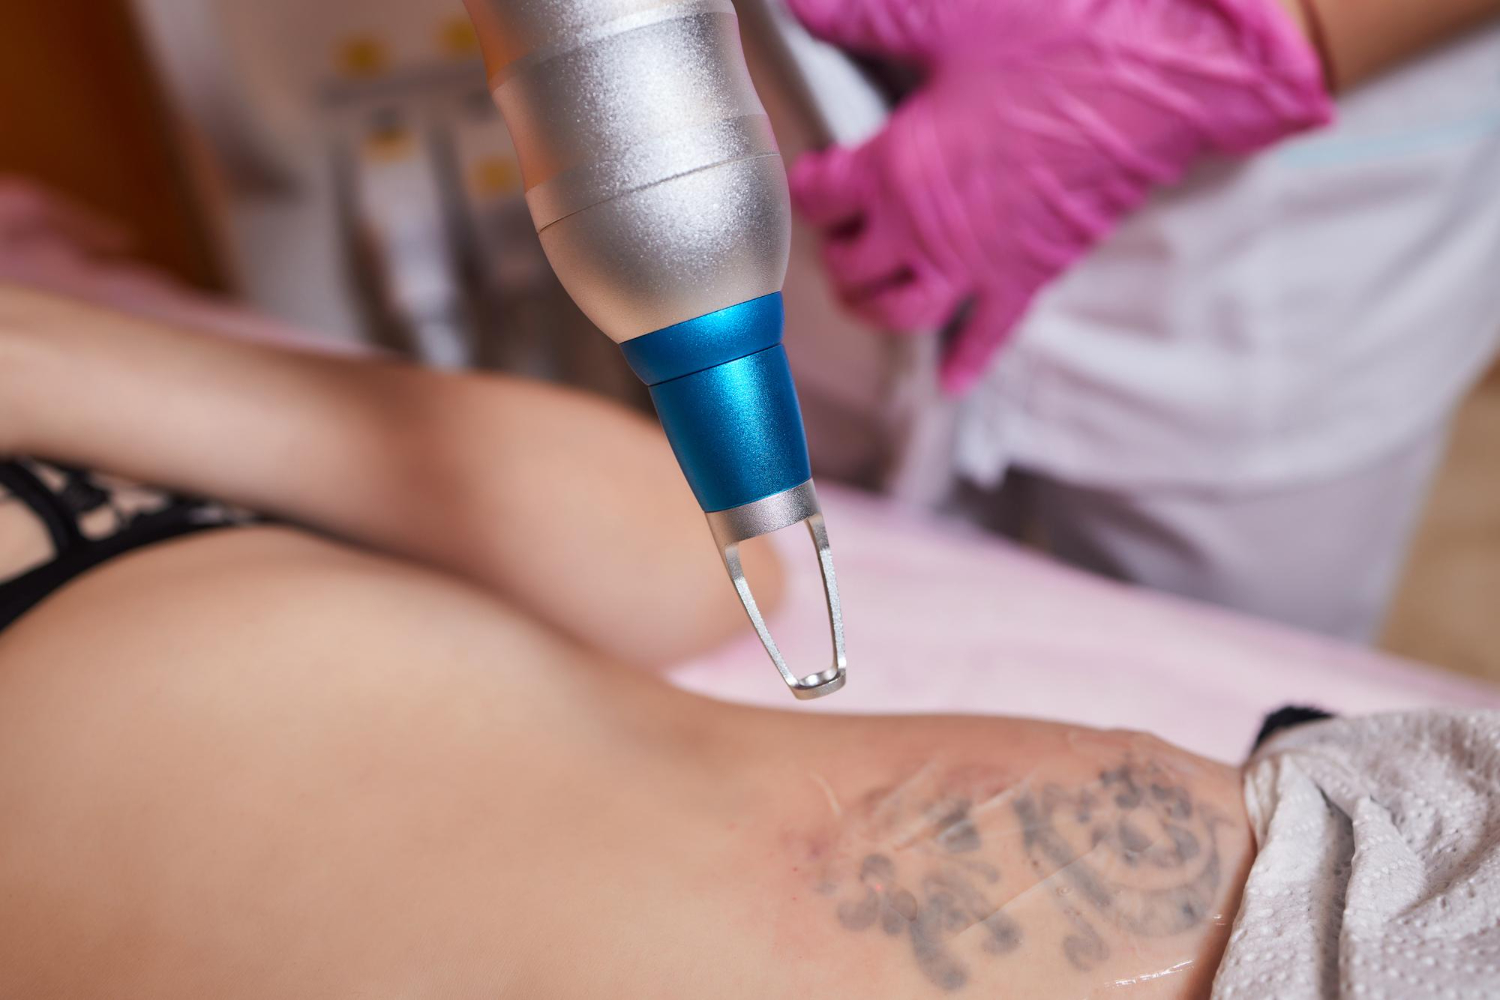 Did you know that 92% of the population has contemplated getting a tattoo removed? Are you seeking tattoo removal? 